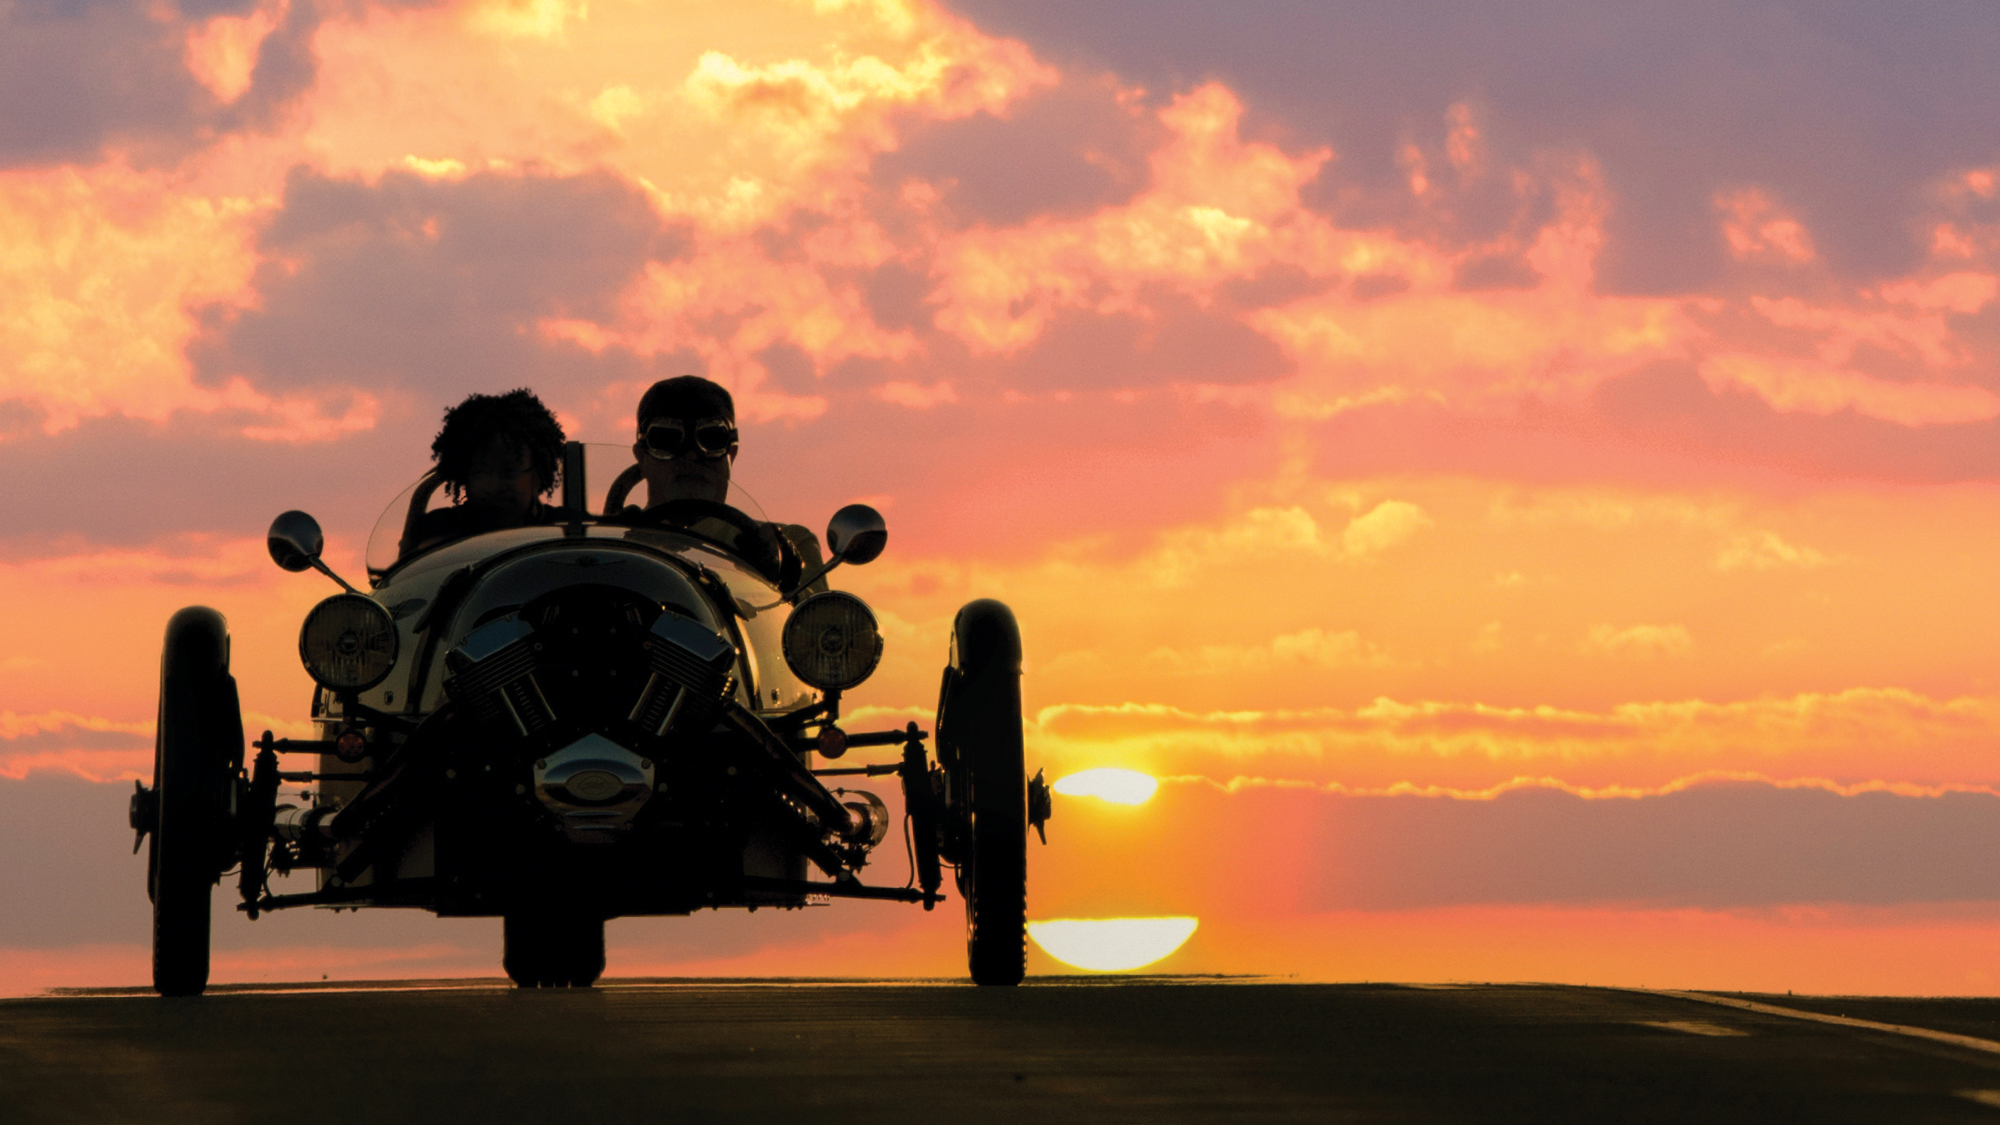 Scott and Freeman ride in his car silhouette by the setting sun